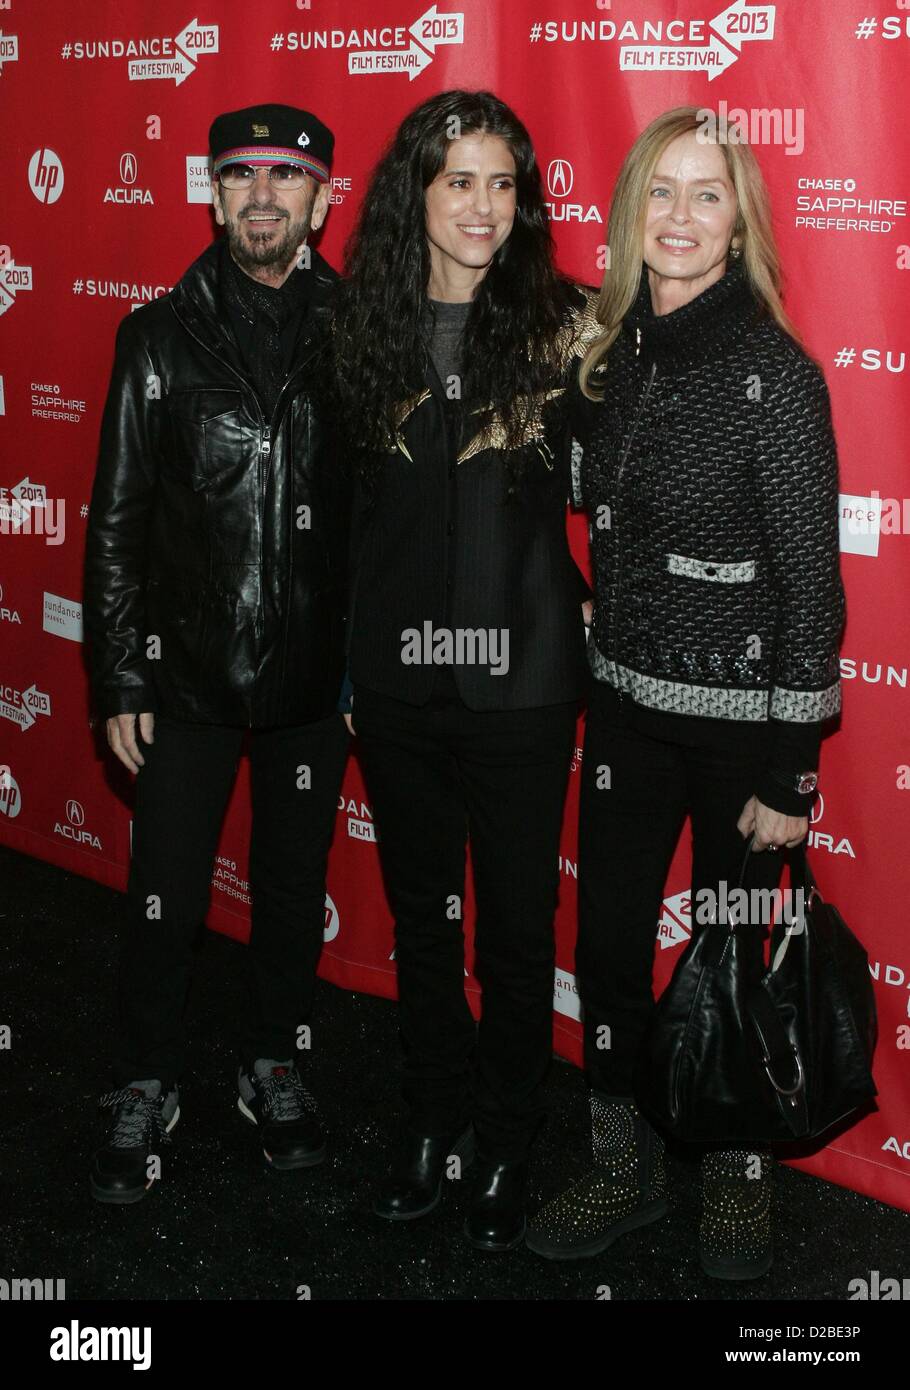 Ringo Starr, Francesca Gregorini, Barbara Bach at arrivals for EMANUEL AND THE TRUTH ABOUT FISHES Premiere at 2013 Sundance Film Festival, Library Center Theatre, Park City, UT, USA. January 18, 2013. Photo By: James Atoa/Everett Collection/Alamy live news. Stock Photo